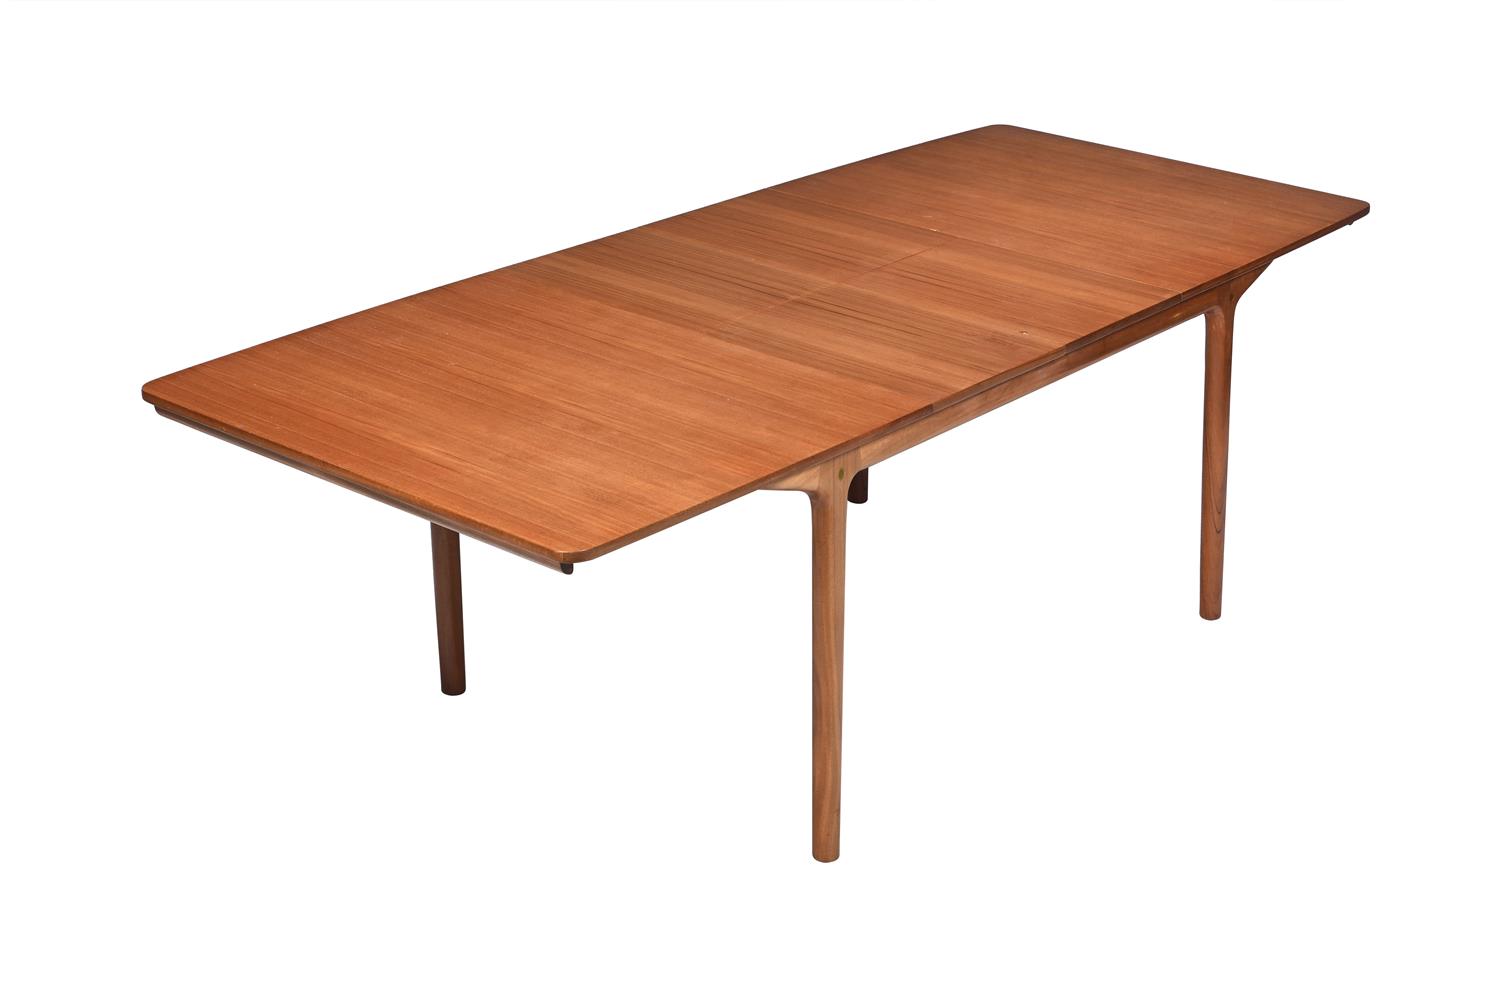 A MID CENTURY TEAK EXTENDABLE DINING TABLE, BY A.H. MCINTOSH & CO. LTD - Image 2 of 3